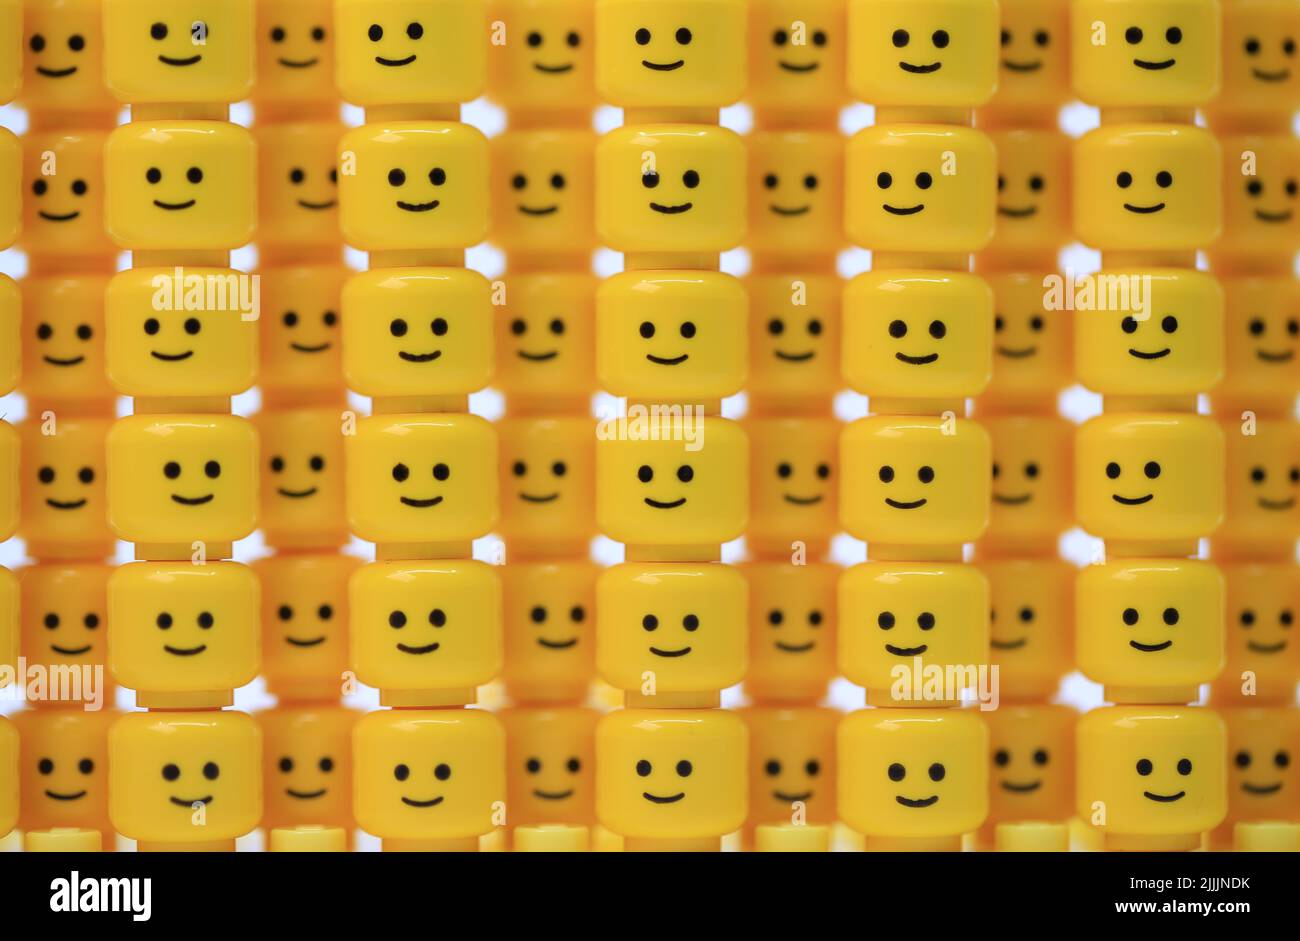 thousand of happy face head have been built as the wall Stock Photo